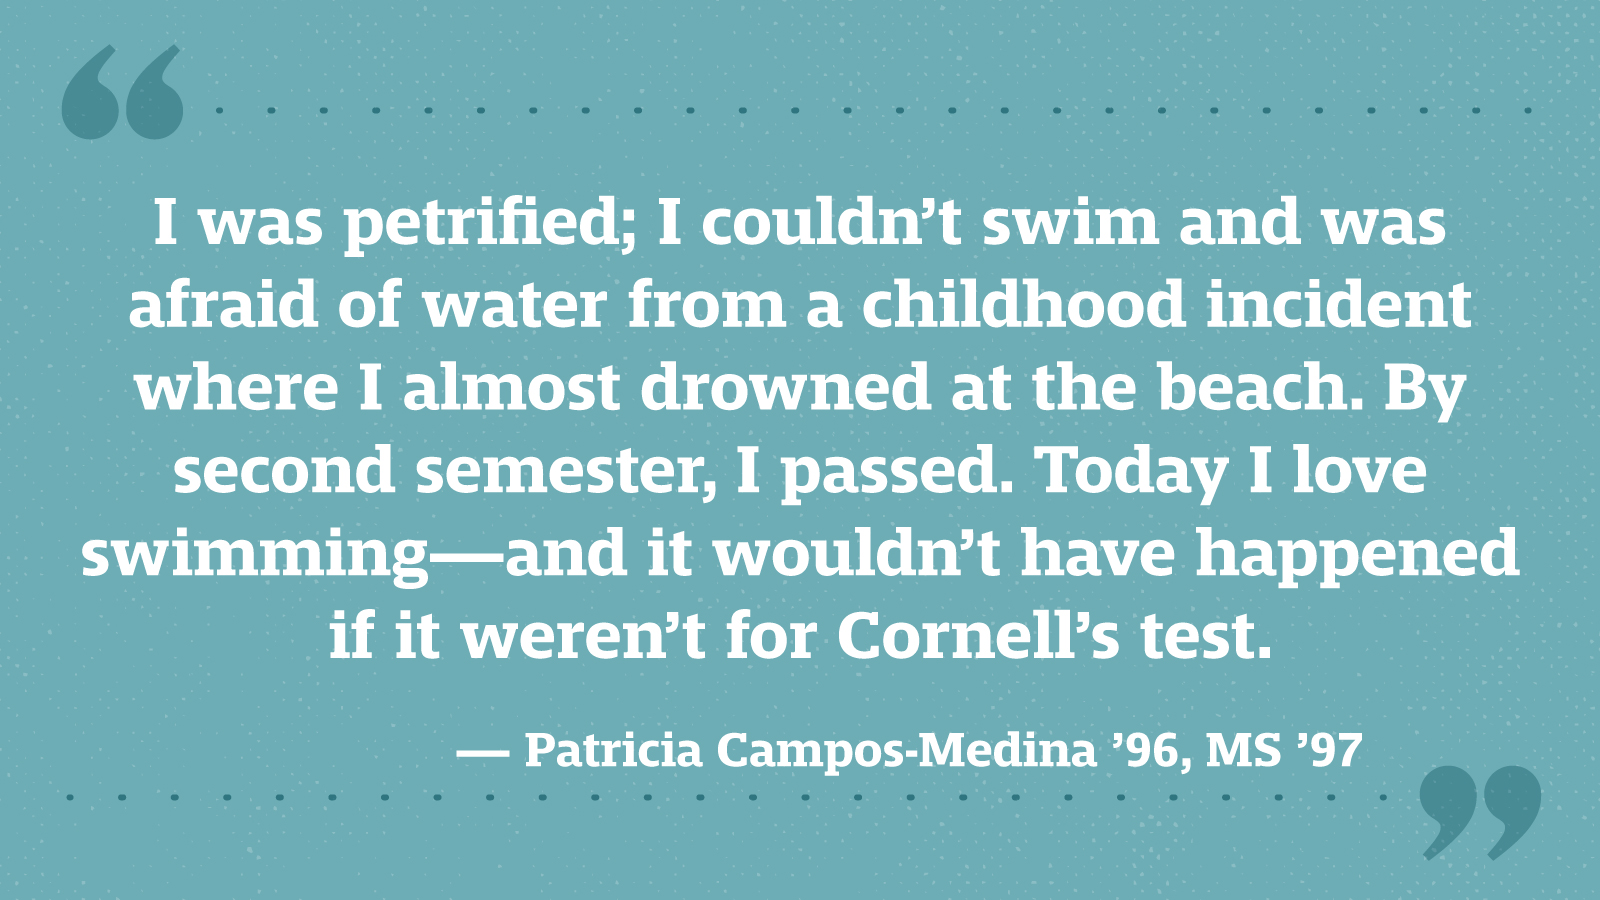 I was petrified; I couldn’t swim and was afraid of water from a childhood incident where I almost drowned at the beach. By second semester, I passed. Today I love swimming—and it wouldn’t have happened if it weren’t for Cornell’s test. — Patricia Campos-Medina ’96, MS ’97